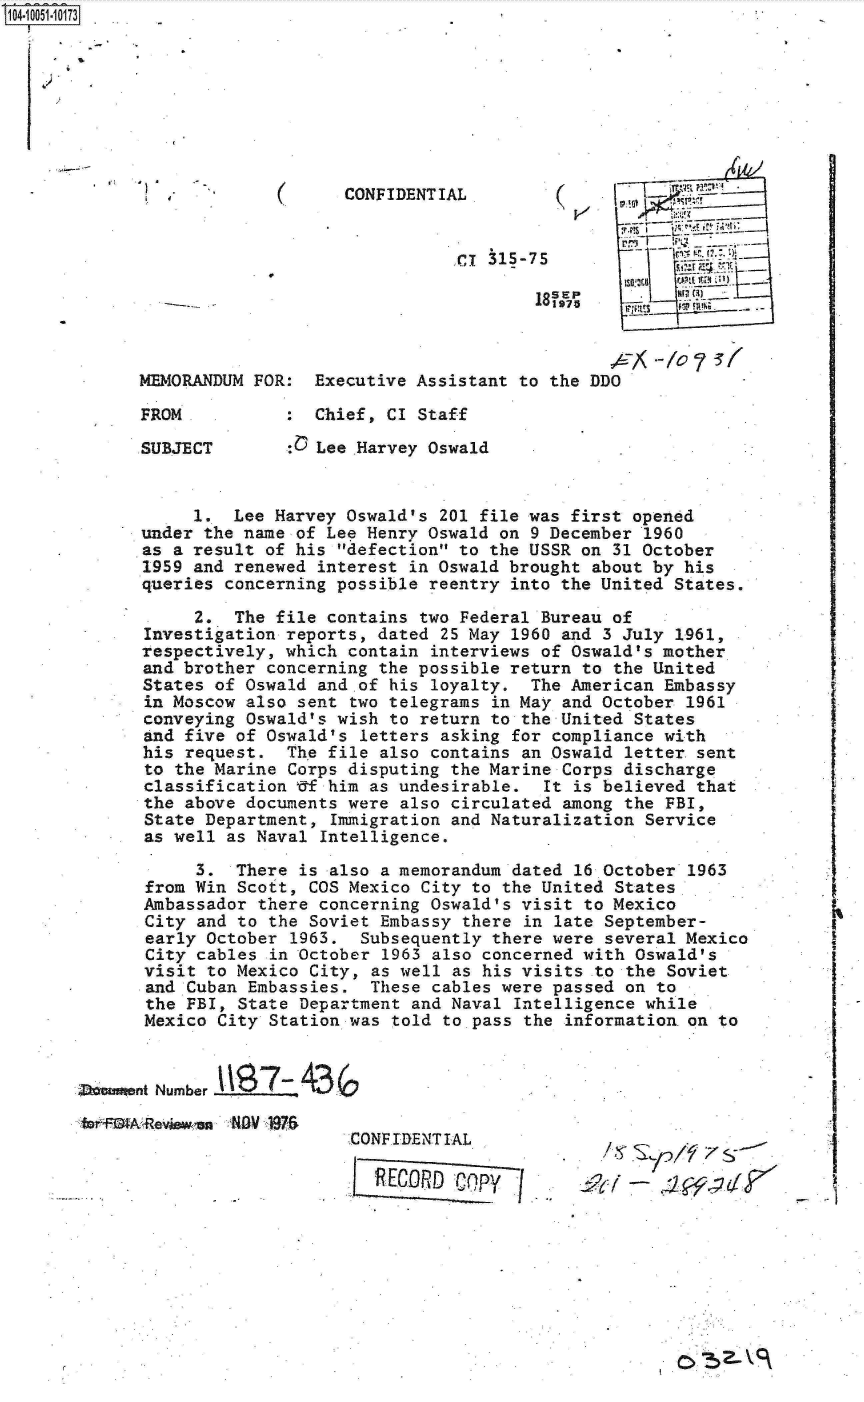 handle is hein.jfk/jfkarch07789 and id is 1 raw text is: 04O5 0O73








                                 CONFIDENTIAL.




                                            CR 3,5-75








             SUBJECT          Lee Harvey Oswald


                  1.  Lee Harvey Oswald's 201 file was first opened
             under the name of Lee Henry Oswald on 9 December 1960
             as a result of his defection to the USSR on 31 October
             1959 and renewed interest in Oswald brought about by his
             queries concerning possible reentry into the United States.

                  2.  The file contains two Federal Bureau of
             Investigation reports, dated 25 May 1960 and 3 July 1961,
             respectively, which contain interviews of Oswald's mother
             and brother concerning the possible return to the United
             States of Oswald and.of his loyalty.  The American Embassy
             in Moscow also sent two telegrams in May and October 1961
             conveying Oswald's wish to return to the United States
             and five of Oswald's letters asking for compliance with
             his request.  Th'e file also contains an Oswald letter sent
             to the Marine Corps disputing the Marine Corps discharge
             classification Uf him as undesirable.  It is believed that
             the above documents were also circulated among the FBI,
             State Department, Immigration and Naturalization Service
             as well as Naval Intelligence.

                  3.  There is also a memorandum dated 16 October 1963
             from Win Scott, COS Mexico City to the United States
             Ambassador there concerning Oswald's visit to Mexico
             City and to the Soviet Embassy there in late September-
             early October 1963.  Subsequently there were several Mexico
             City cables in October 1963 also concerned with Oswald's
             visit to Mexico City, as well as his visits to the Soviet
             and Cuban Embassies.  These cables were passed on to
             the FBI, State Department and Naval Intelligence while
             Mexico City Station was told to pass the information on to


        Monent Number

        e +3 AReviween 1V 1976
                                 CONFIDENTIAL.
                                          RECOP                    .Cop f


